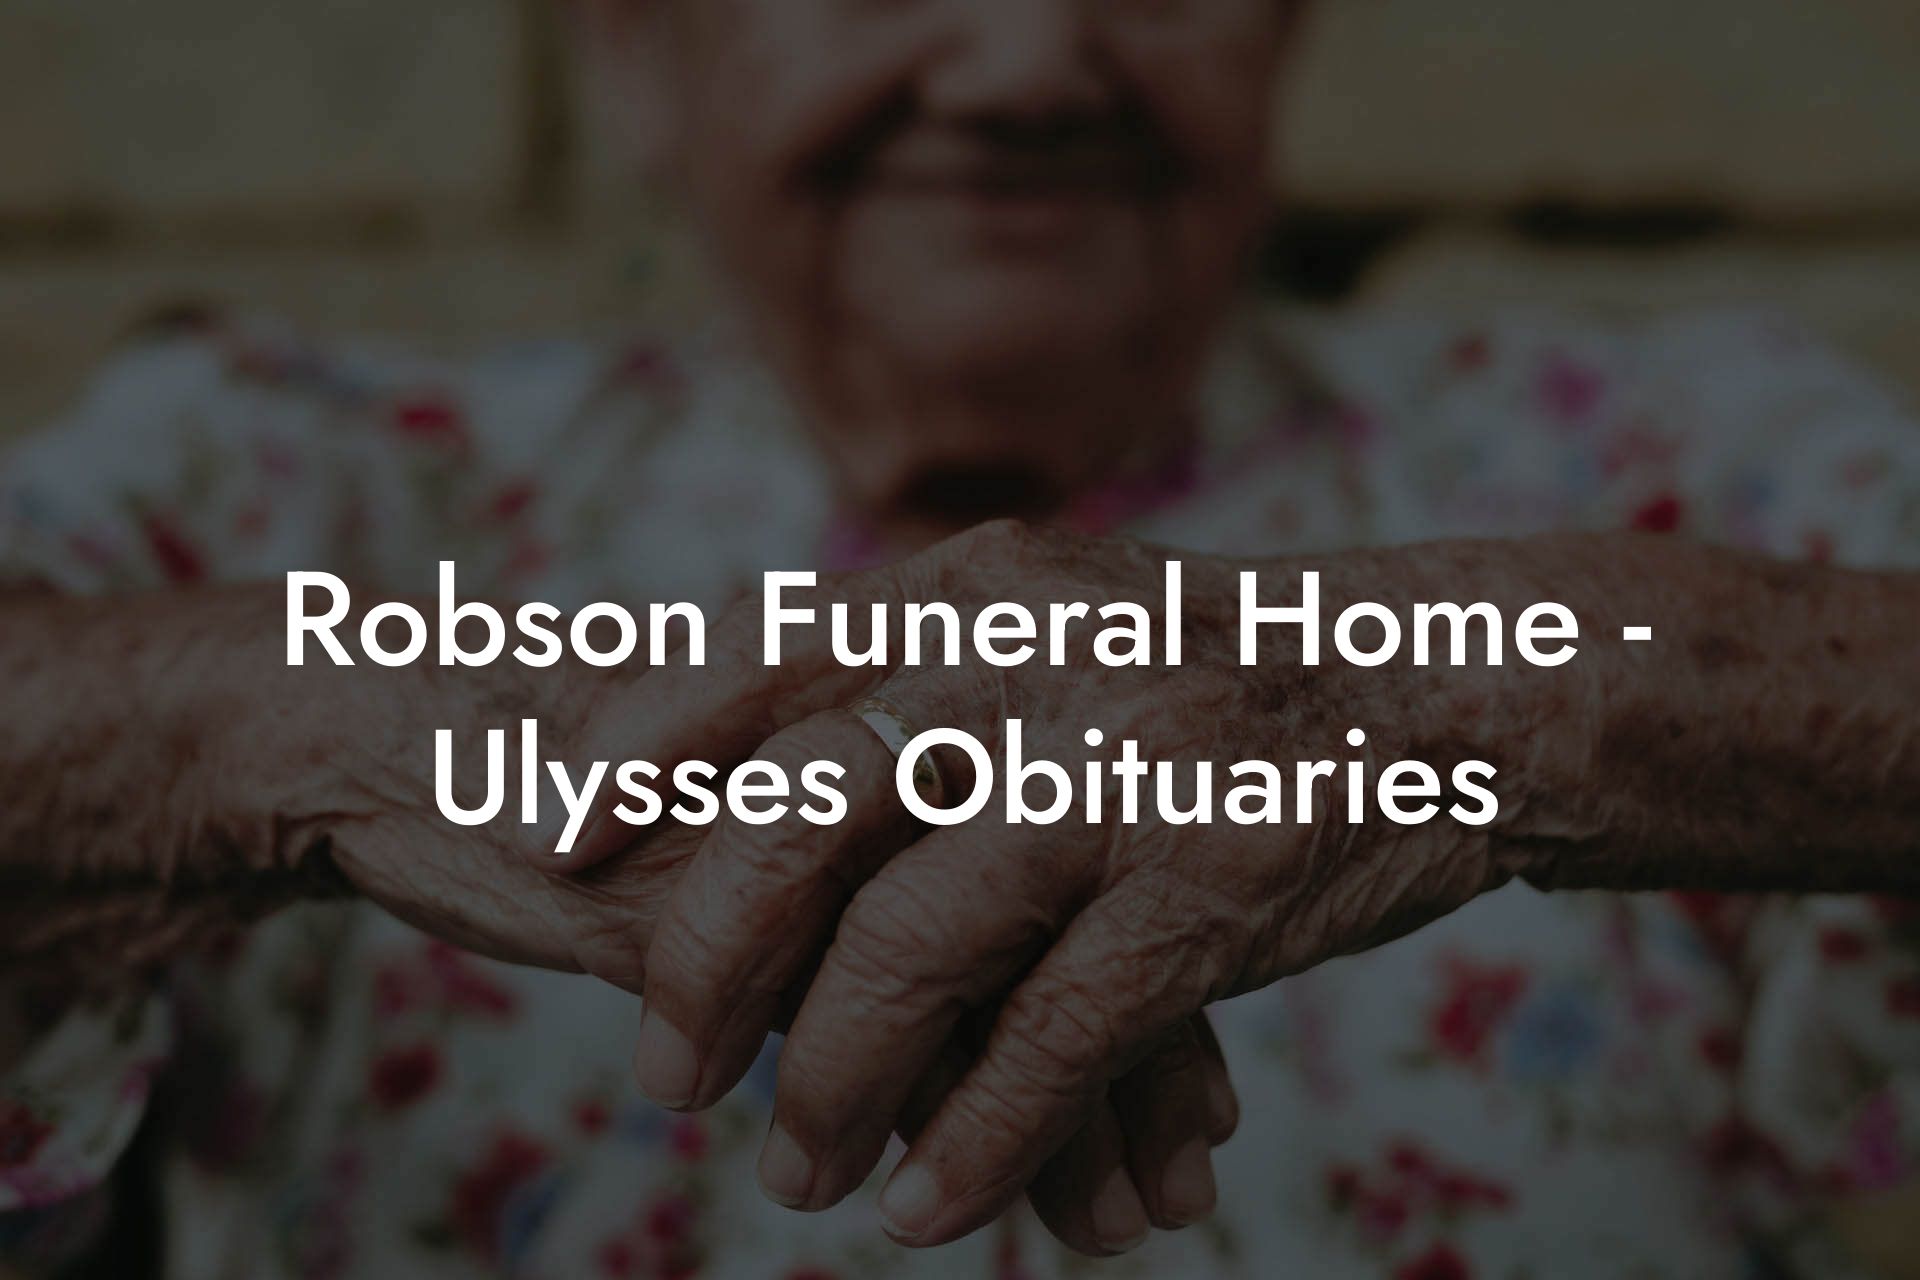 Robson Funeral Home - Ulysses Obituaries